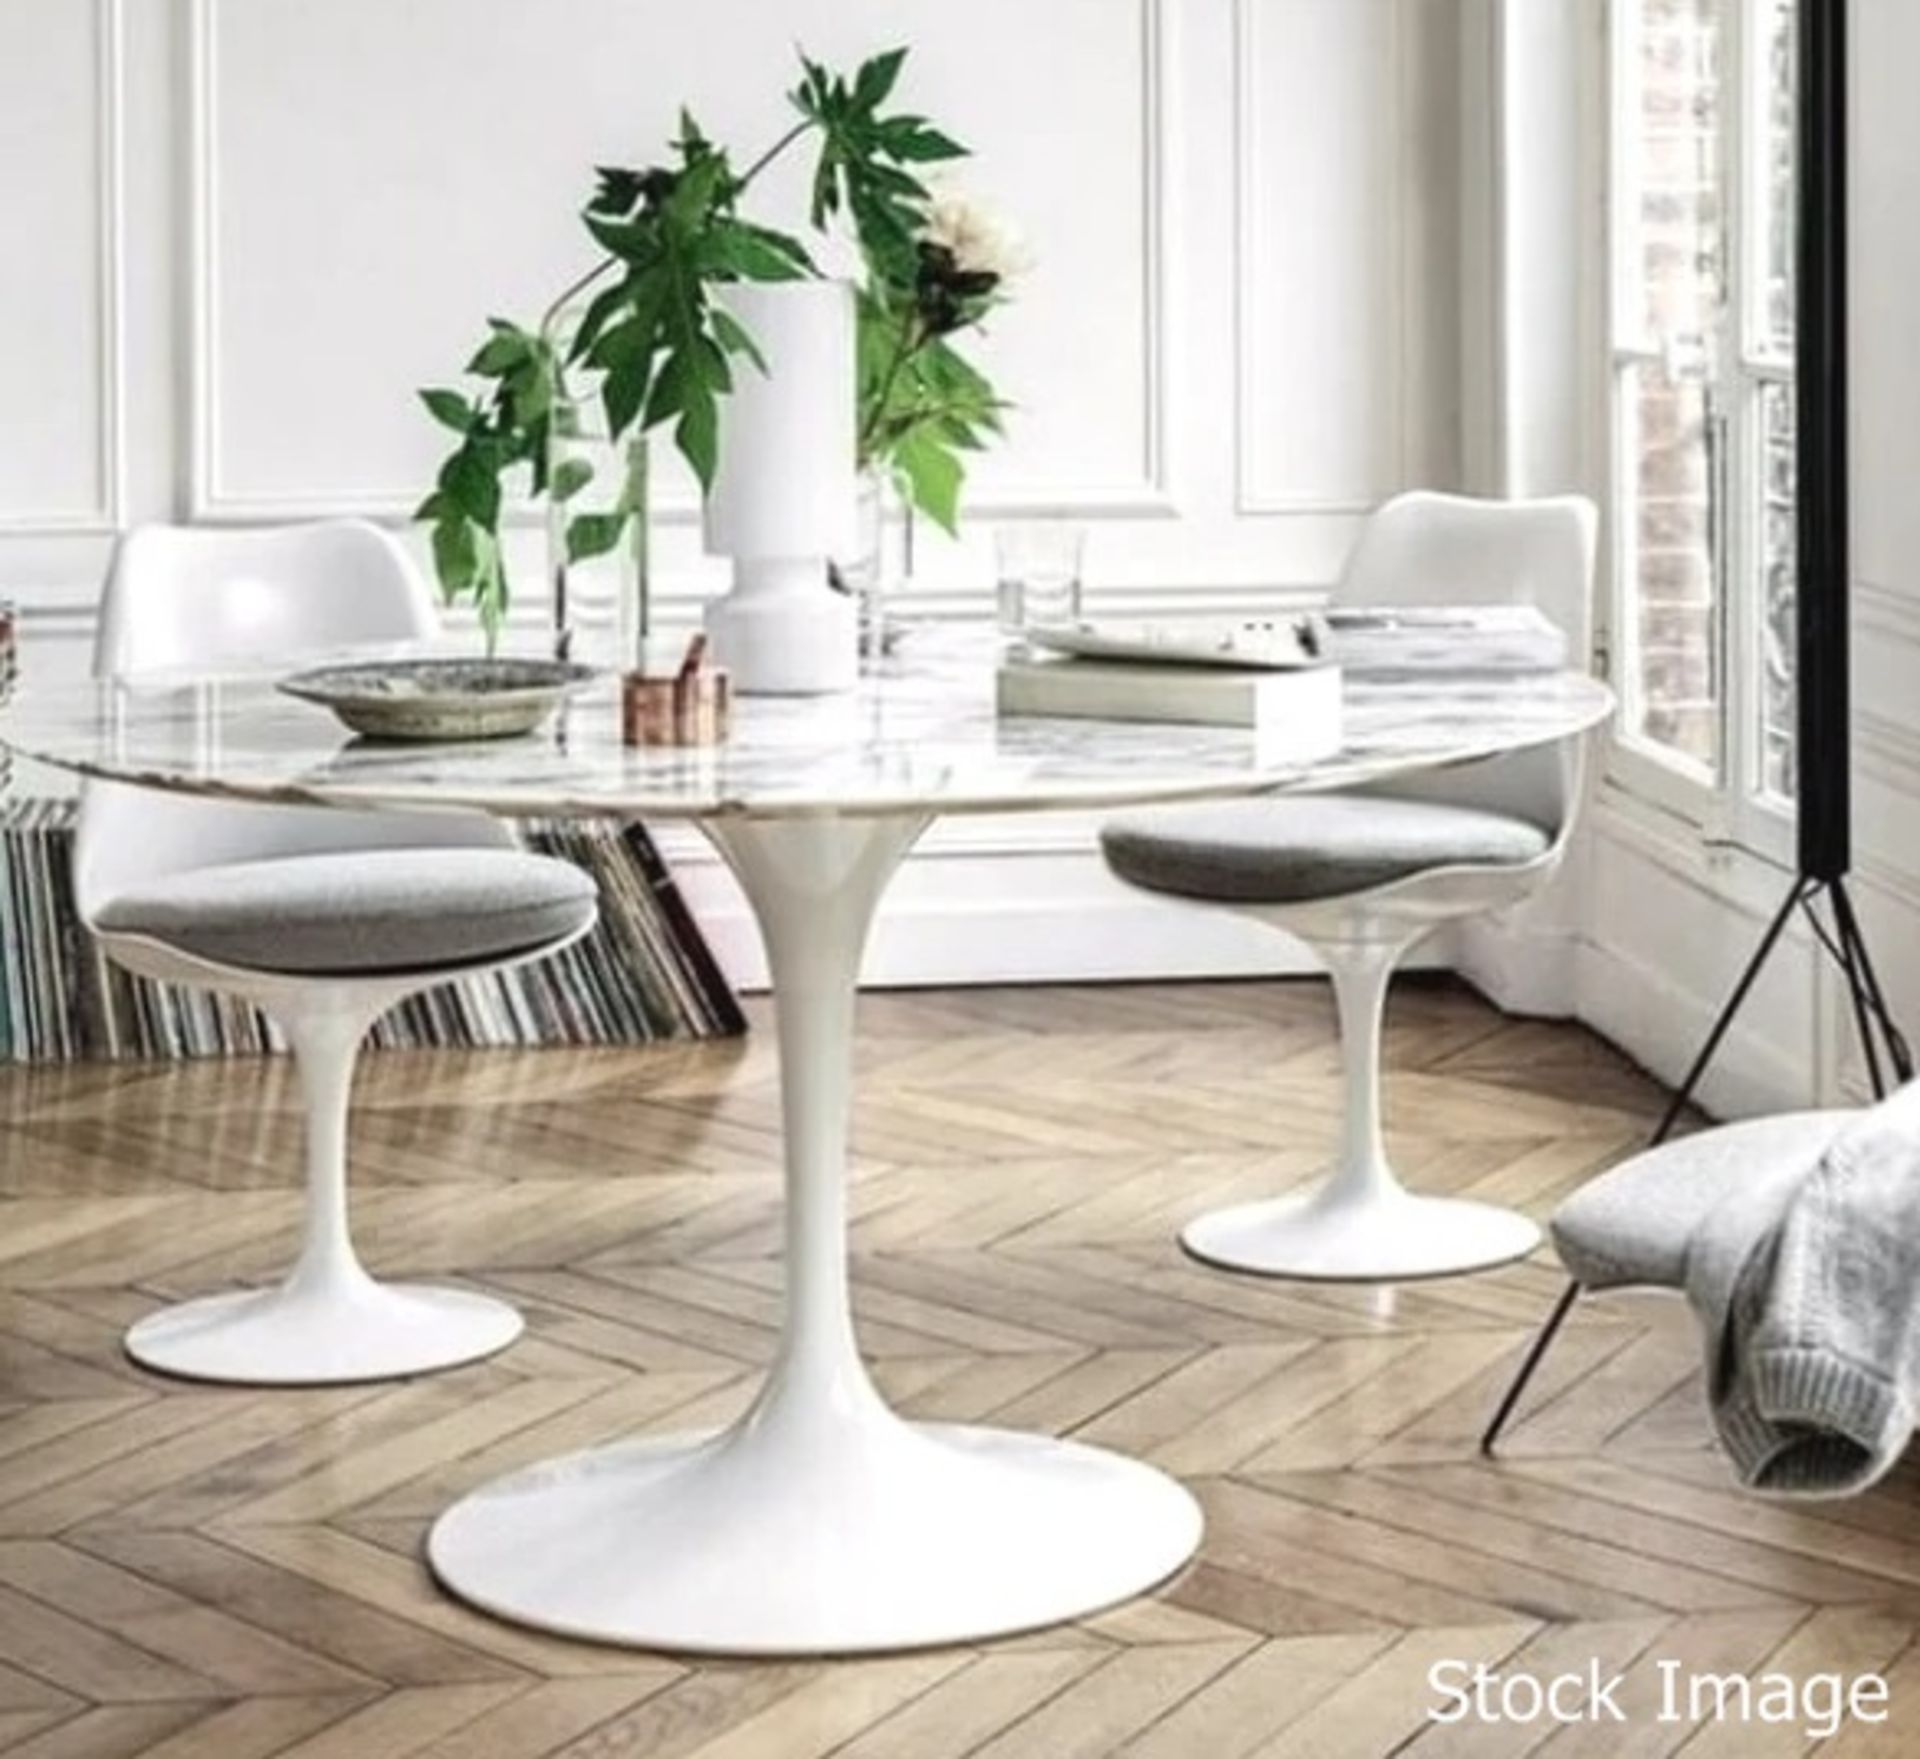 1 x Eero Saarinen Inspired Large Oval Carrara Marble-Topped Dining Table - H74cm x W150 x D120cm - Image 2 of 6